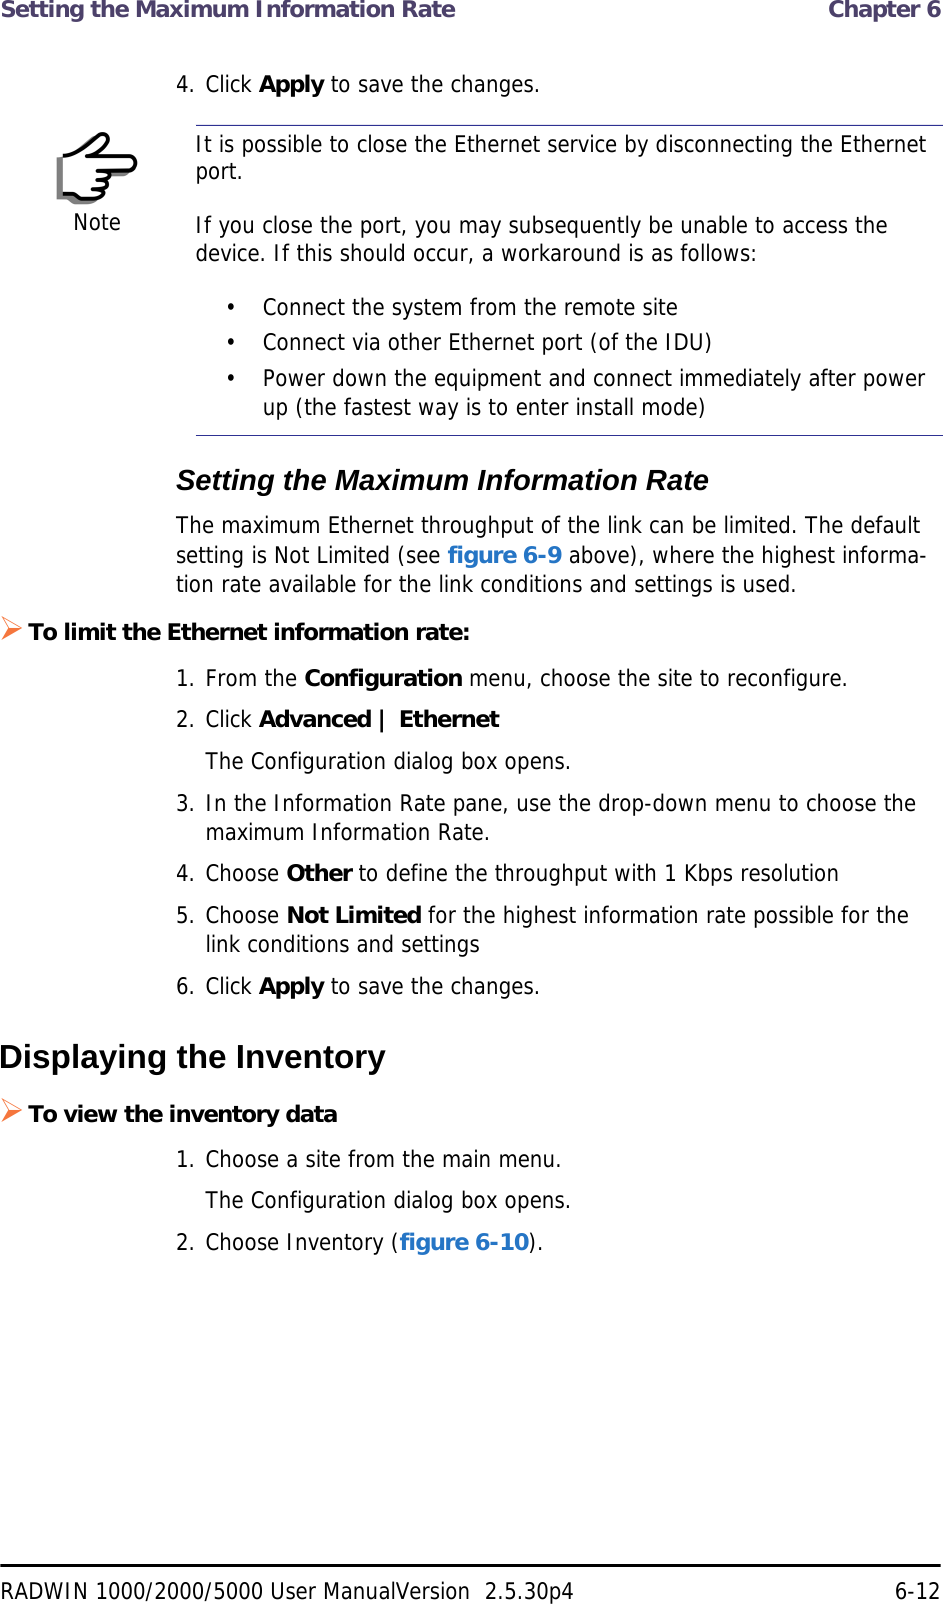 Setting the Maximum Information Rate  Chapter 6RADWIN 1000/2000/5000 User ManualVersion  2.5.30p4 6-124. Click Apply to save the changes.Setting the Maximum Information RateThe maximum Ethernet throughput of the link can be limited. The default setting is Not Limited (see figure 6-9 above), where the highest informa-tion rate available for the link conditions and settings is used.To limit the Ethernet information rate:1. From the Configuration menu, choose the site to reconfigure.2. Click Advanced | EthernetThe Configuration dialog box opens.3. In the Information Rate pane, use the drop-down menu to choose the maximum Information Rate.4. Choose Other to define the throughput with 1 Kbps resolution5. Choose Not Limited for the highest information rate possible for the link conditions and settings6. Click Apply to save the changes.Displaying the InventoryTo view the inventory data1. Choose a site from the main menu.The Configuration dialog box opens.2. Choose Inventory (figure 6-10).NoteIt is possible to close the Ethernet service by disconnecting the Ethernet port.If you close the port, you may subsequently be unable to access the device. If this should occur, a workaround is as follows:• Connect the system from the remote site• Connect via other Ethernet port (of the IDU)• Power down the equipment and connect immediately after power up (the fastest way is to enter install mode)